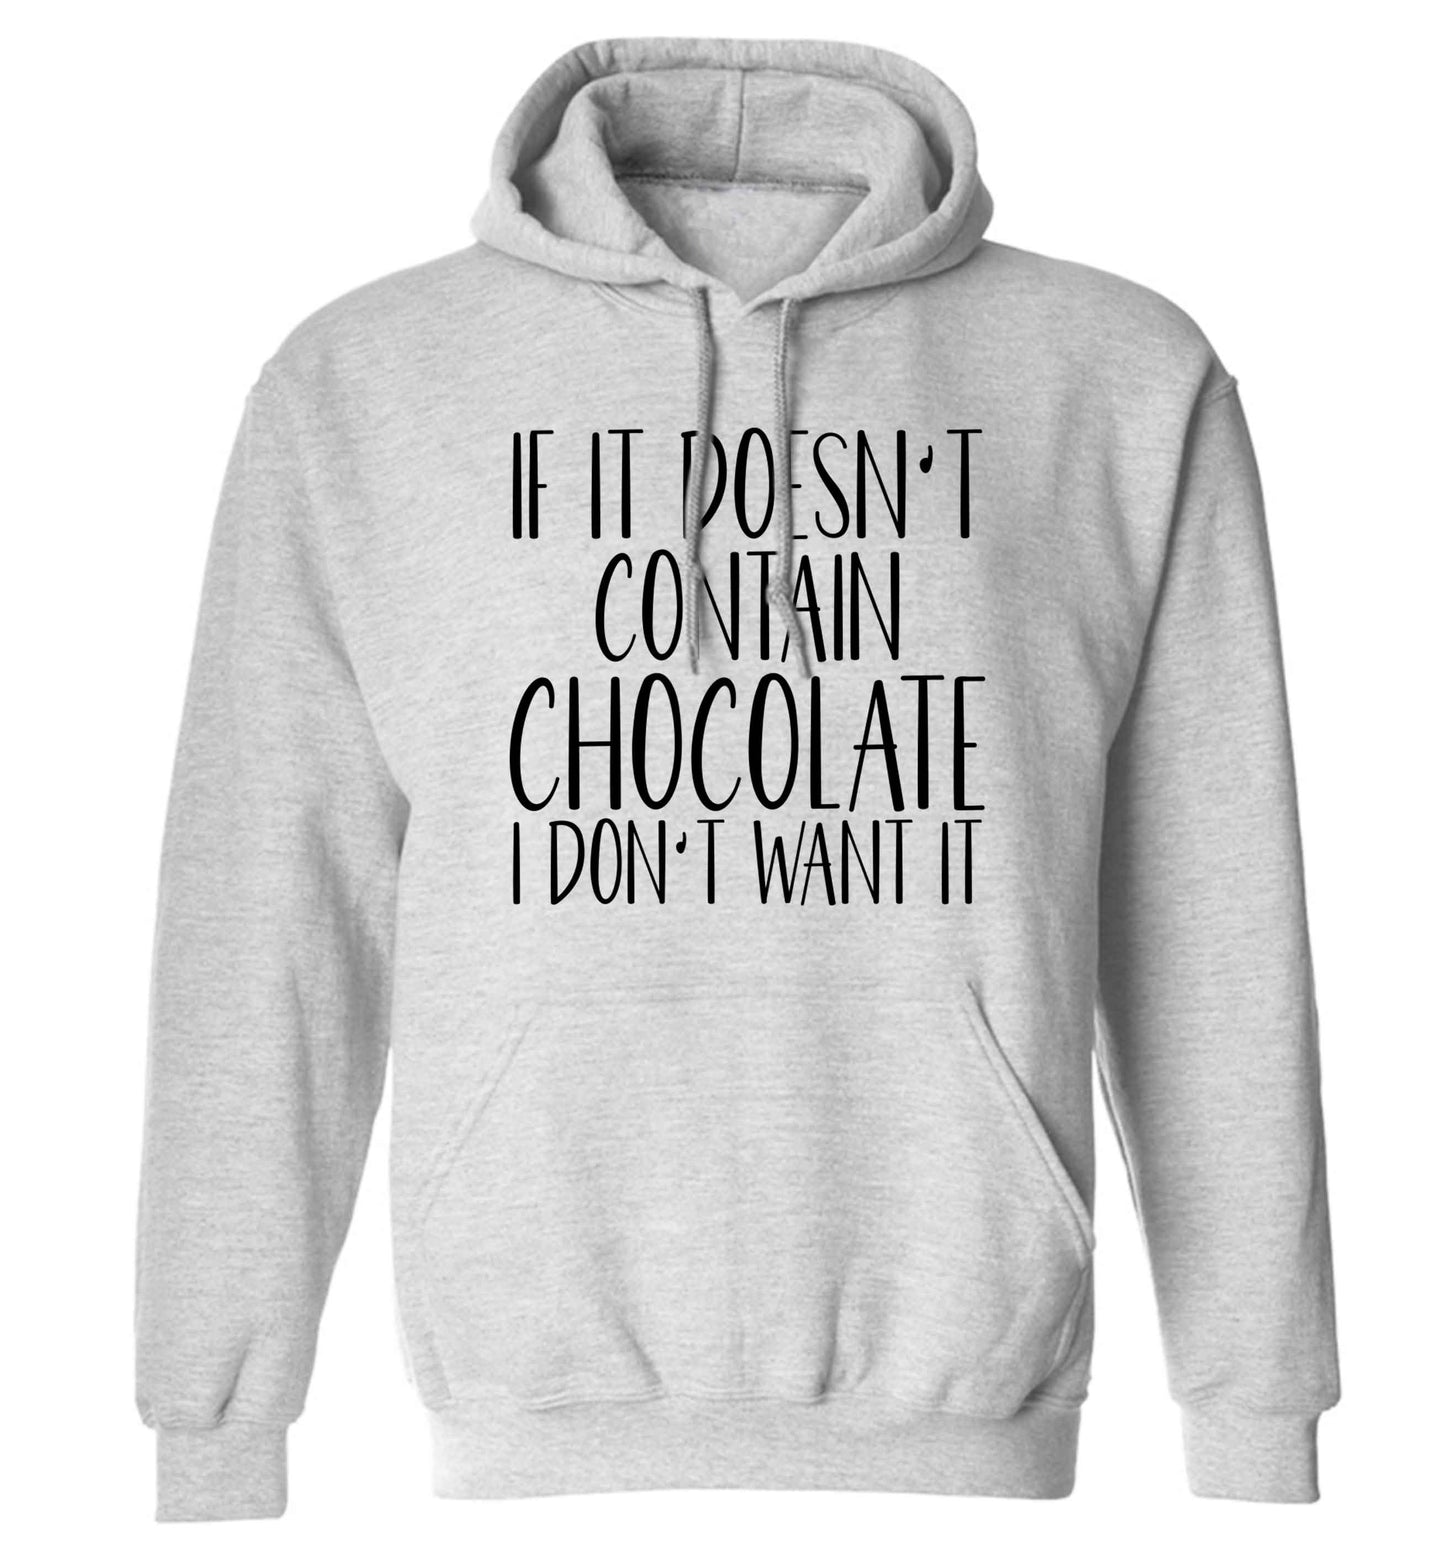 If it doesn't contain chocolate I don't want it adults unisex grey hoodie 2XL